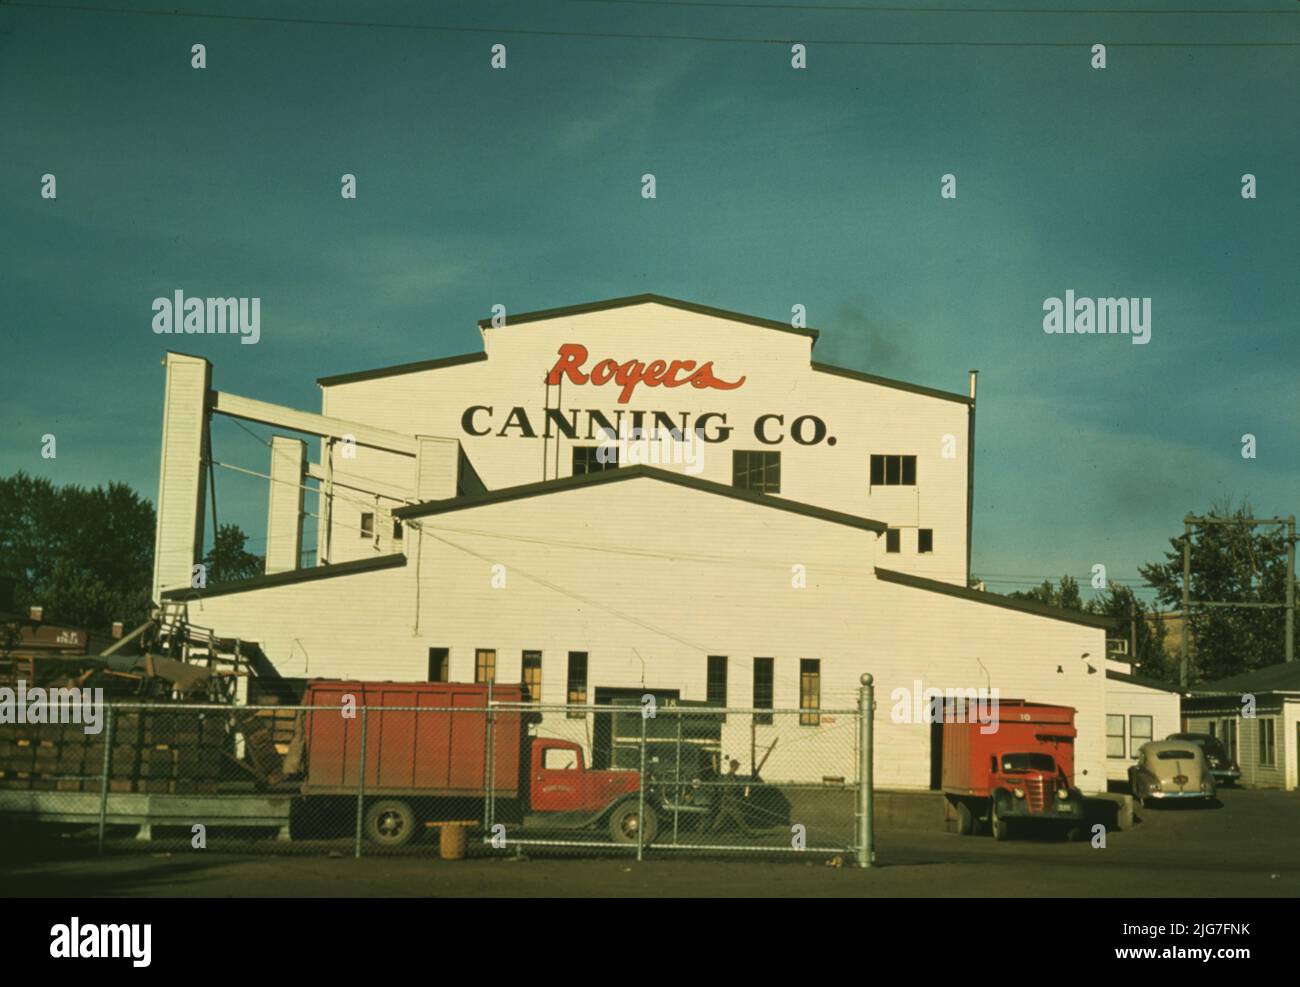 Canning plant where peas are principal project, Milton-Freewater, Oregon. [Sign: 'Rogers Canning Co.]. Stock Photo